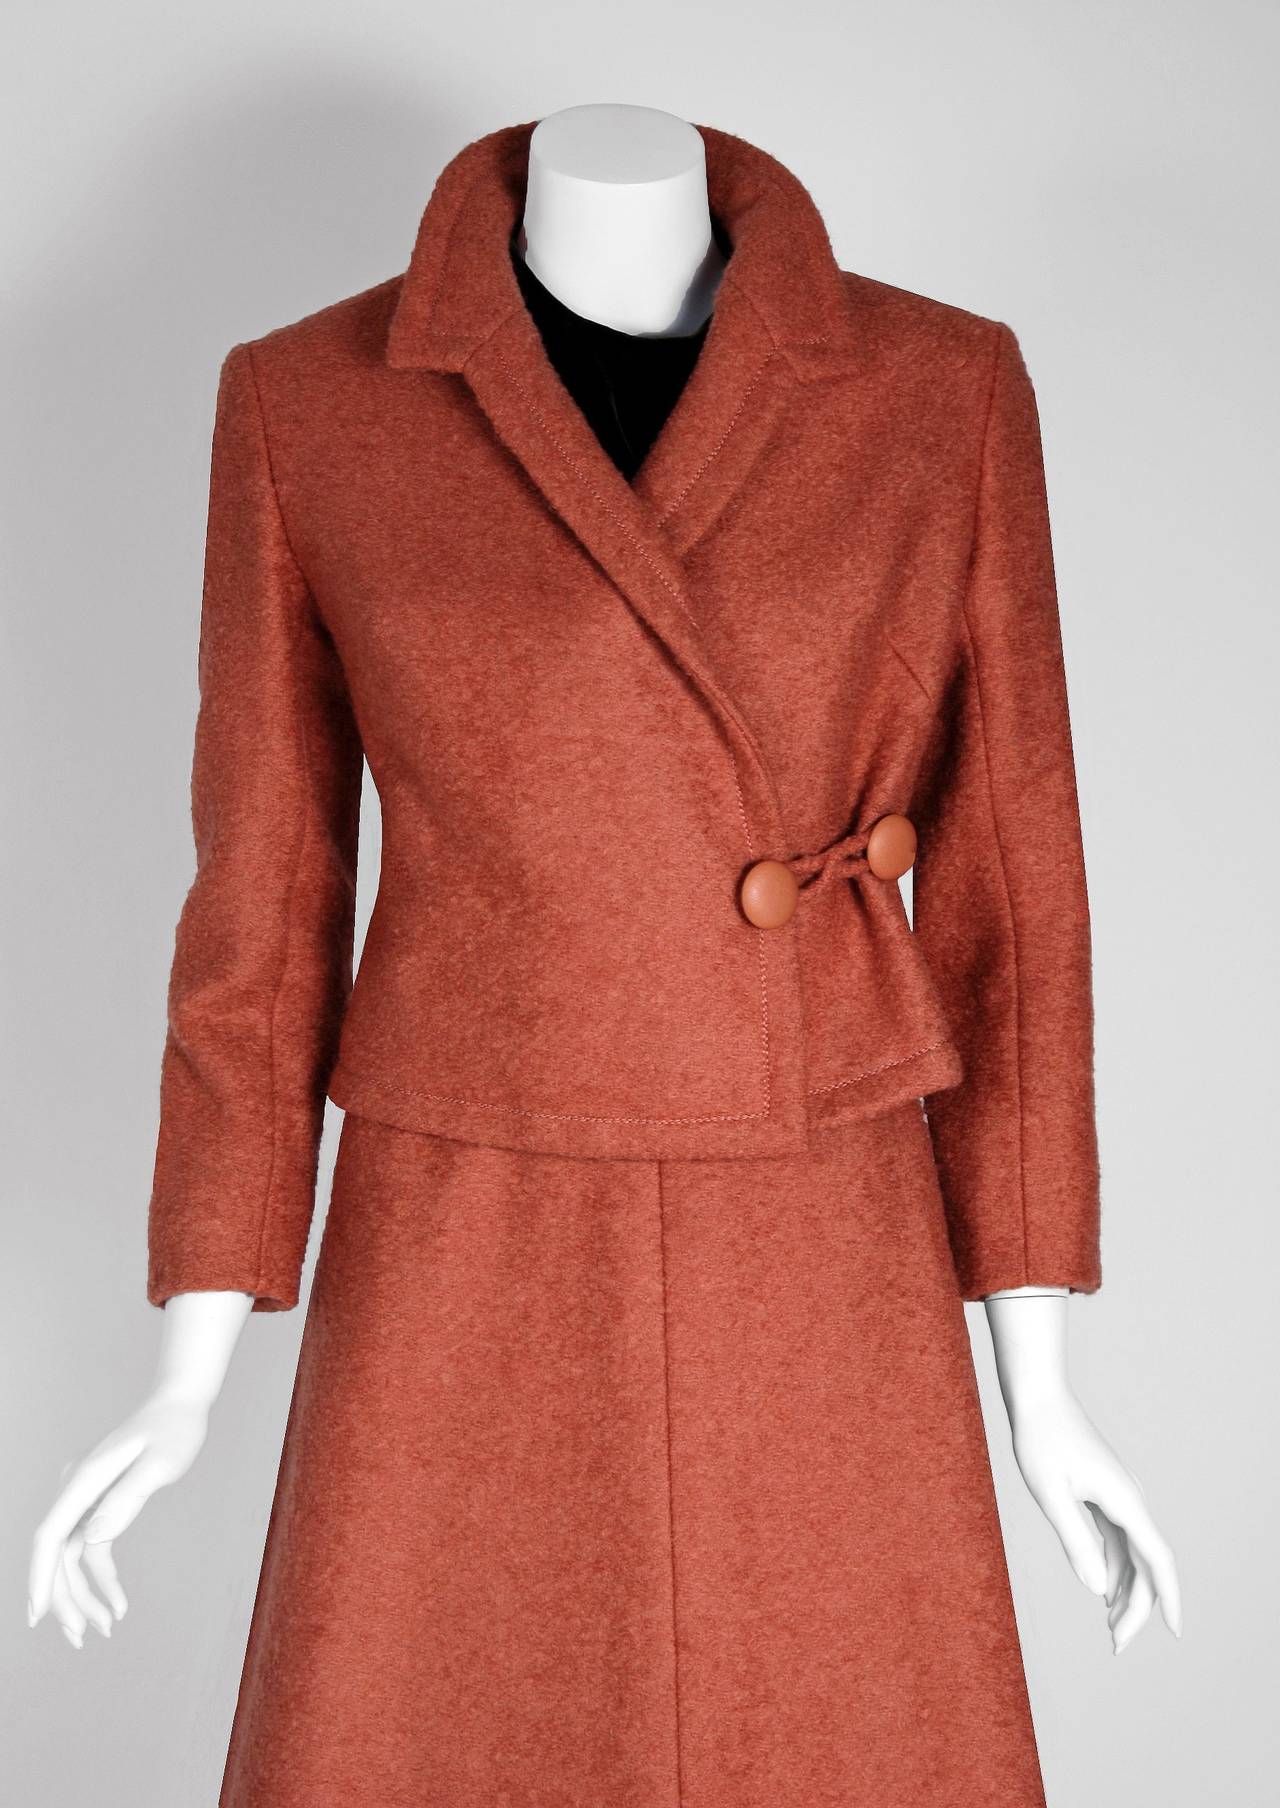 Pink 1960 Christian Dior Demi-Couture Documented Apricot Wool Belted Dress Ensemble